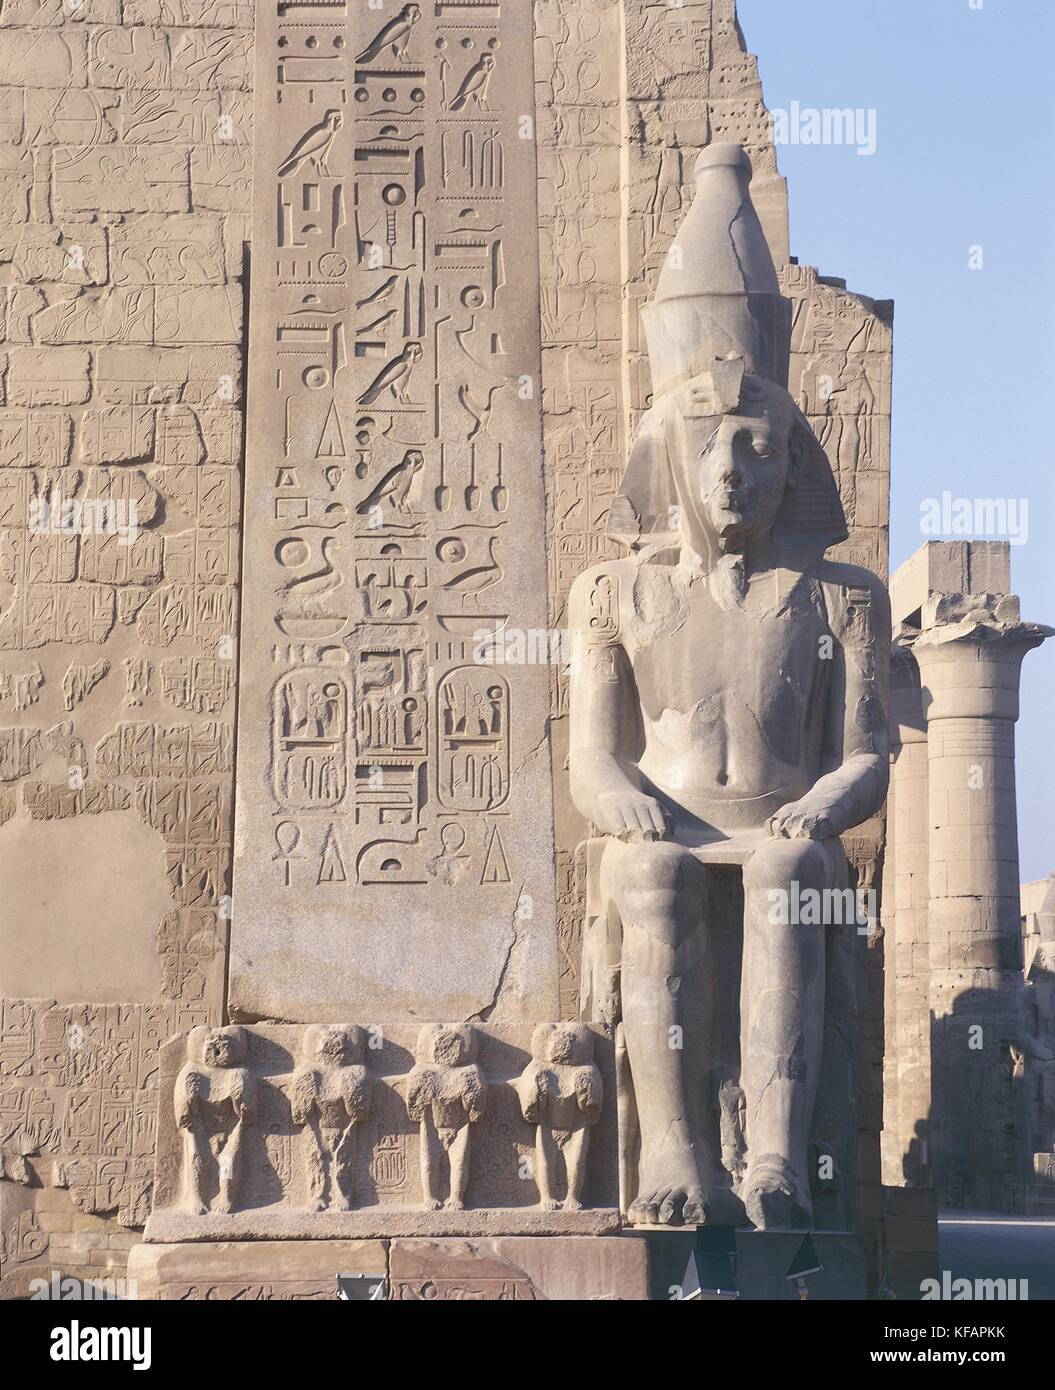 Egypt, Ancient Thebes (UNESCO World Heritage List, 1979). Luxor. Temple of Amon. Pylon of Ramses II, 1290-1224 BC. Colossal statue of Ramses II, 1290-1224 BC Stock Photo